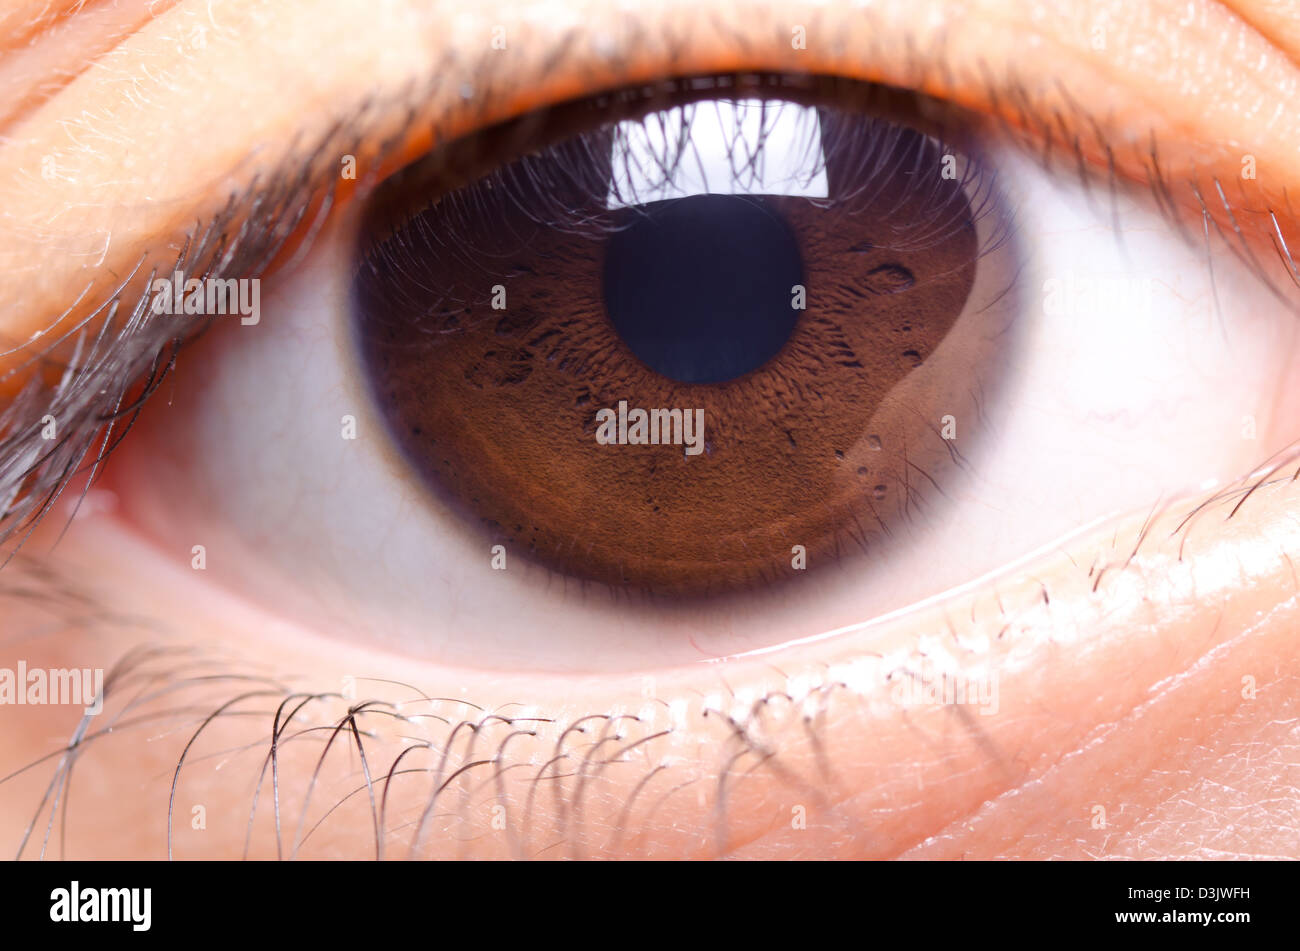 close up image of brown color human eye Stock Photo